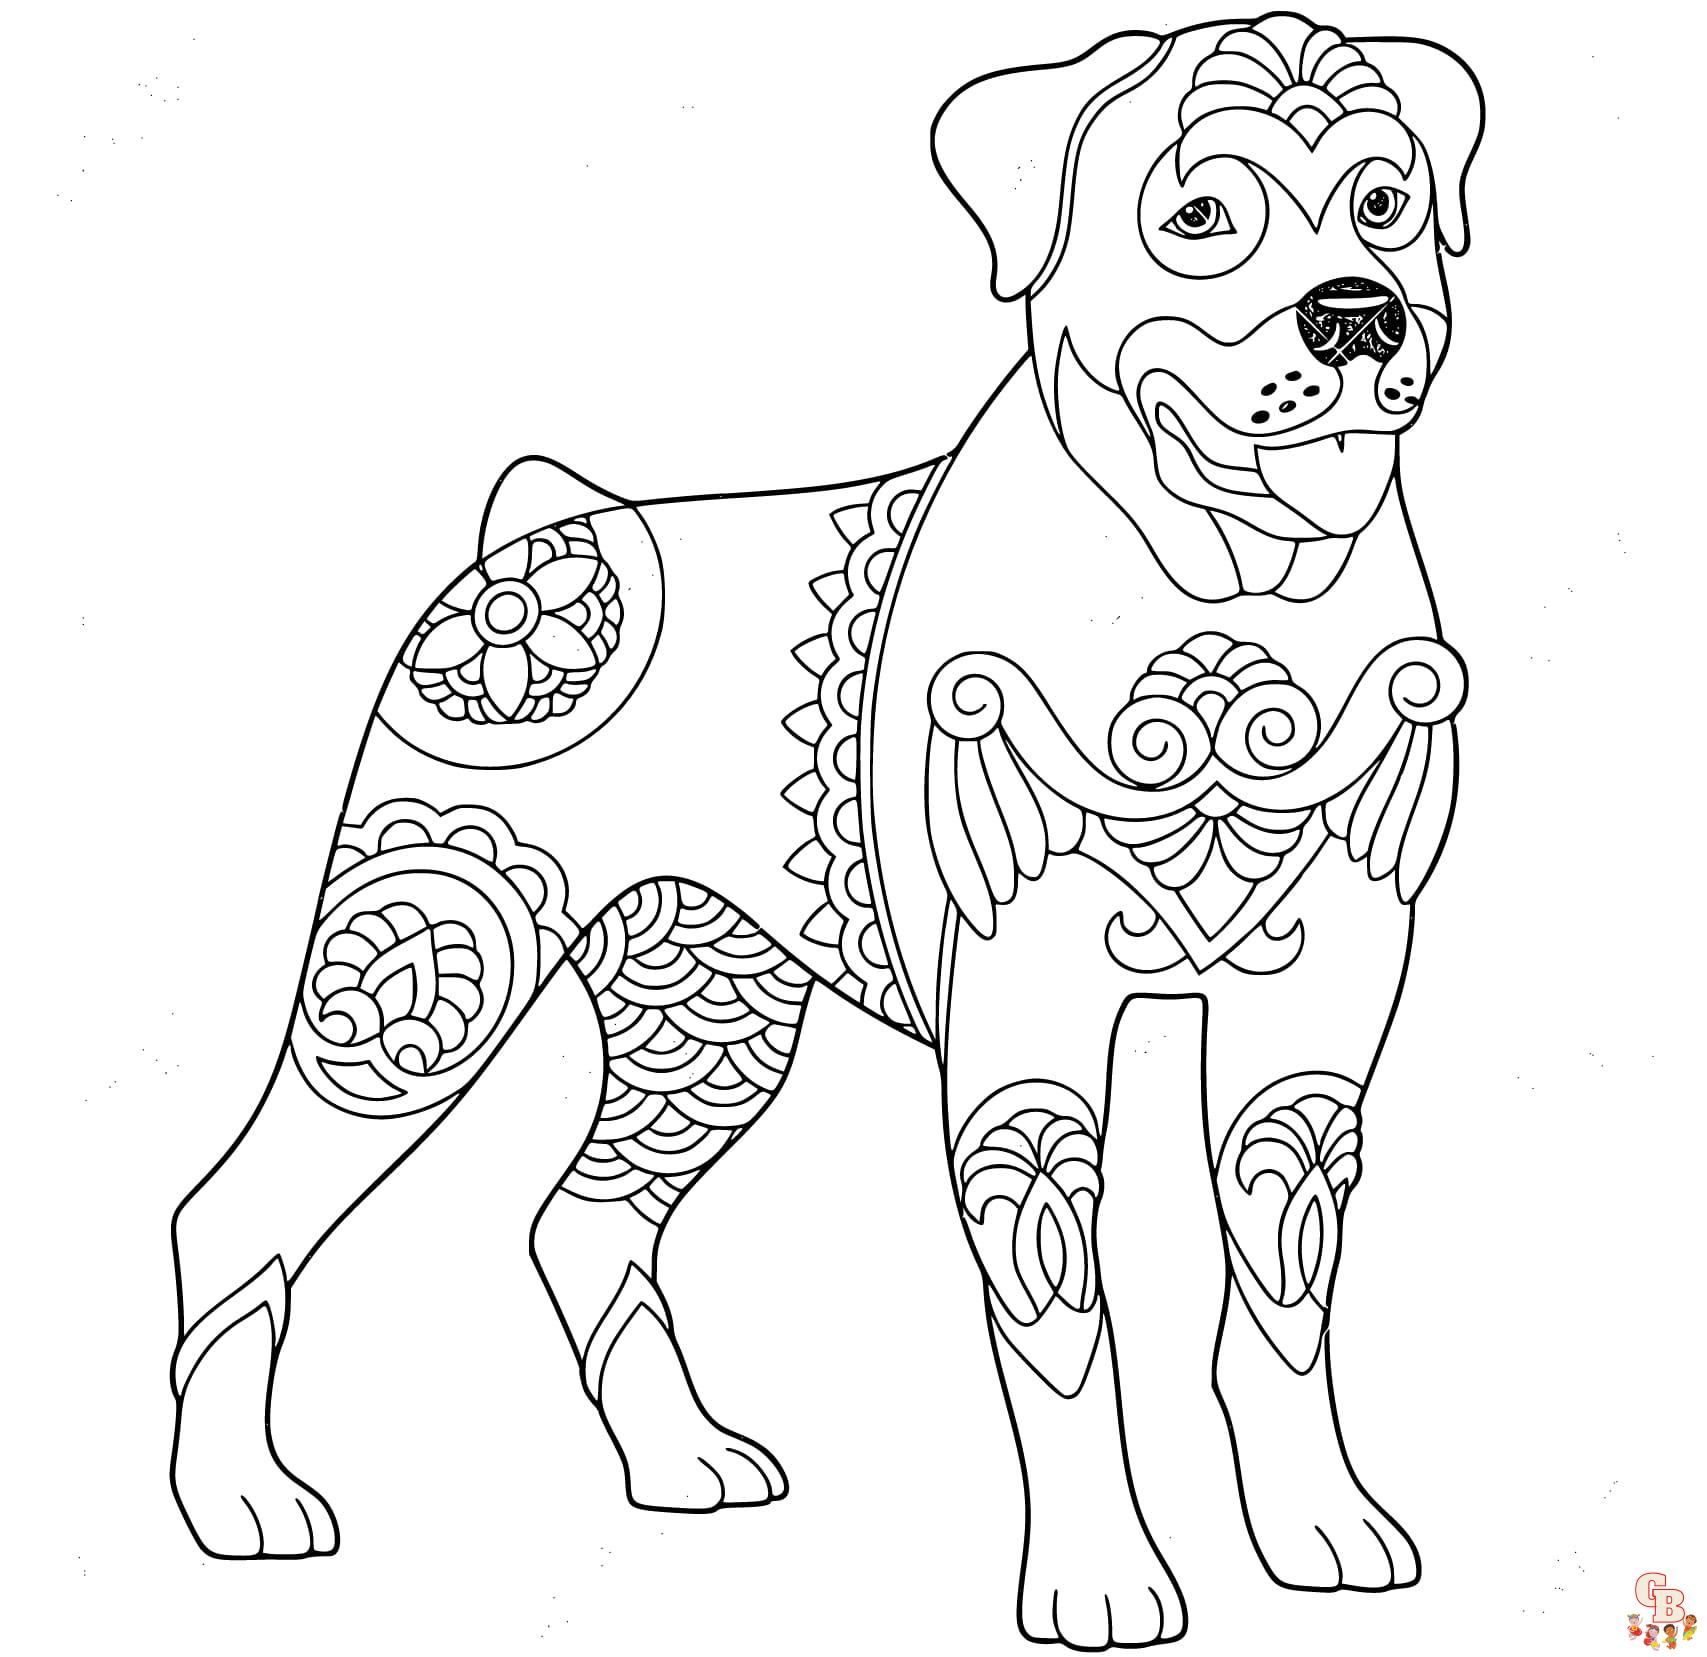 Printable Rottweiler coloring sheets